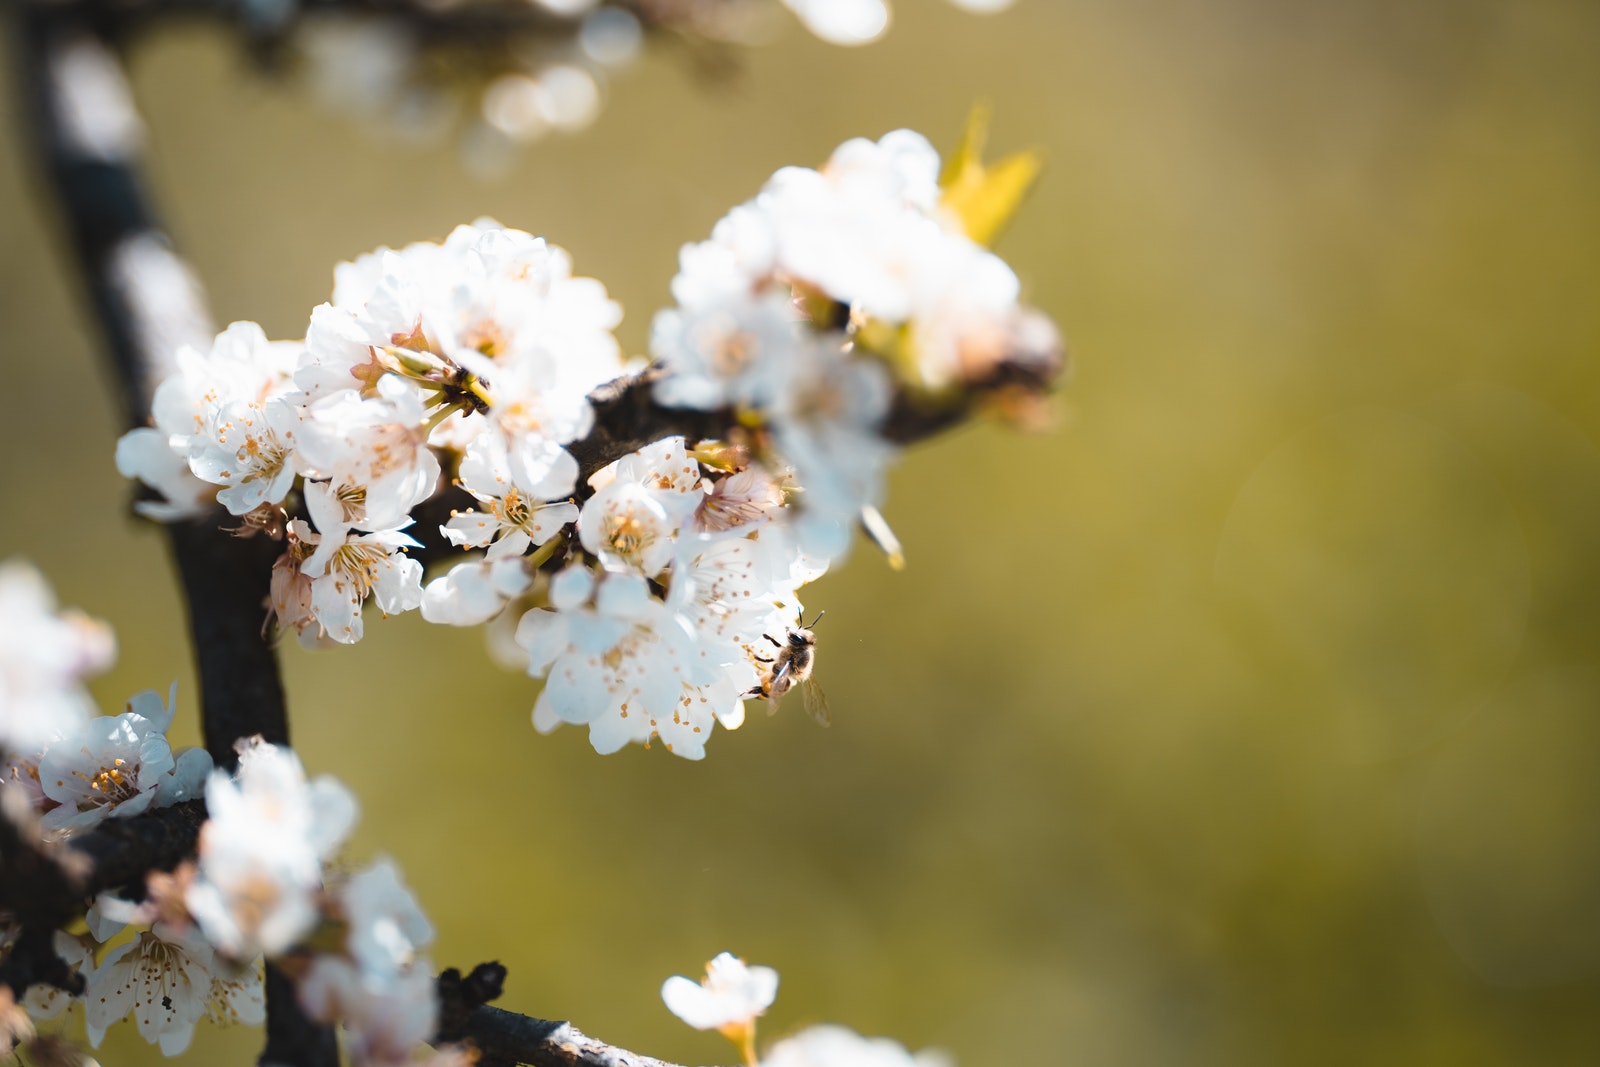 White Cherry Blossom in Close Up Photography